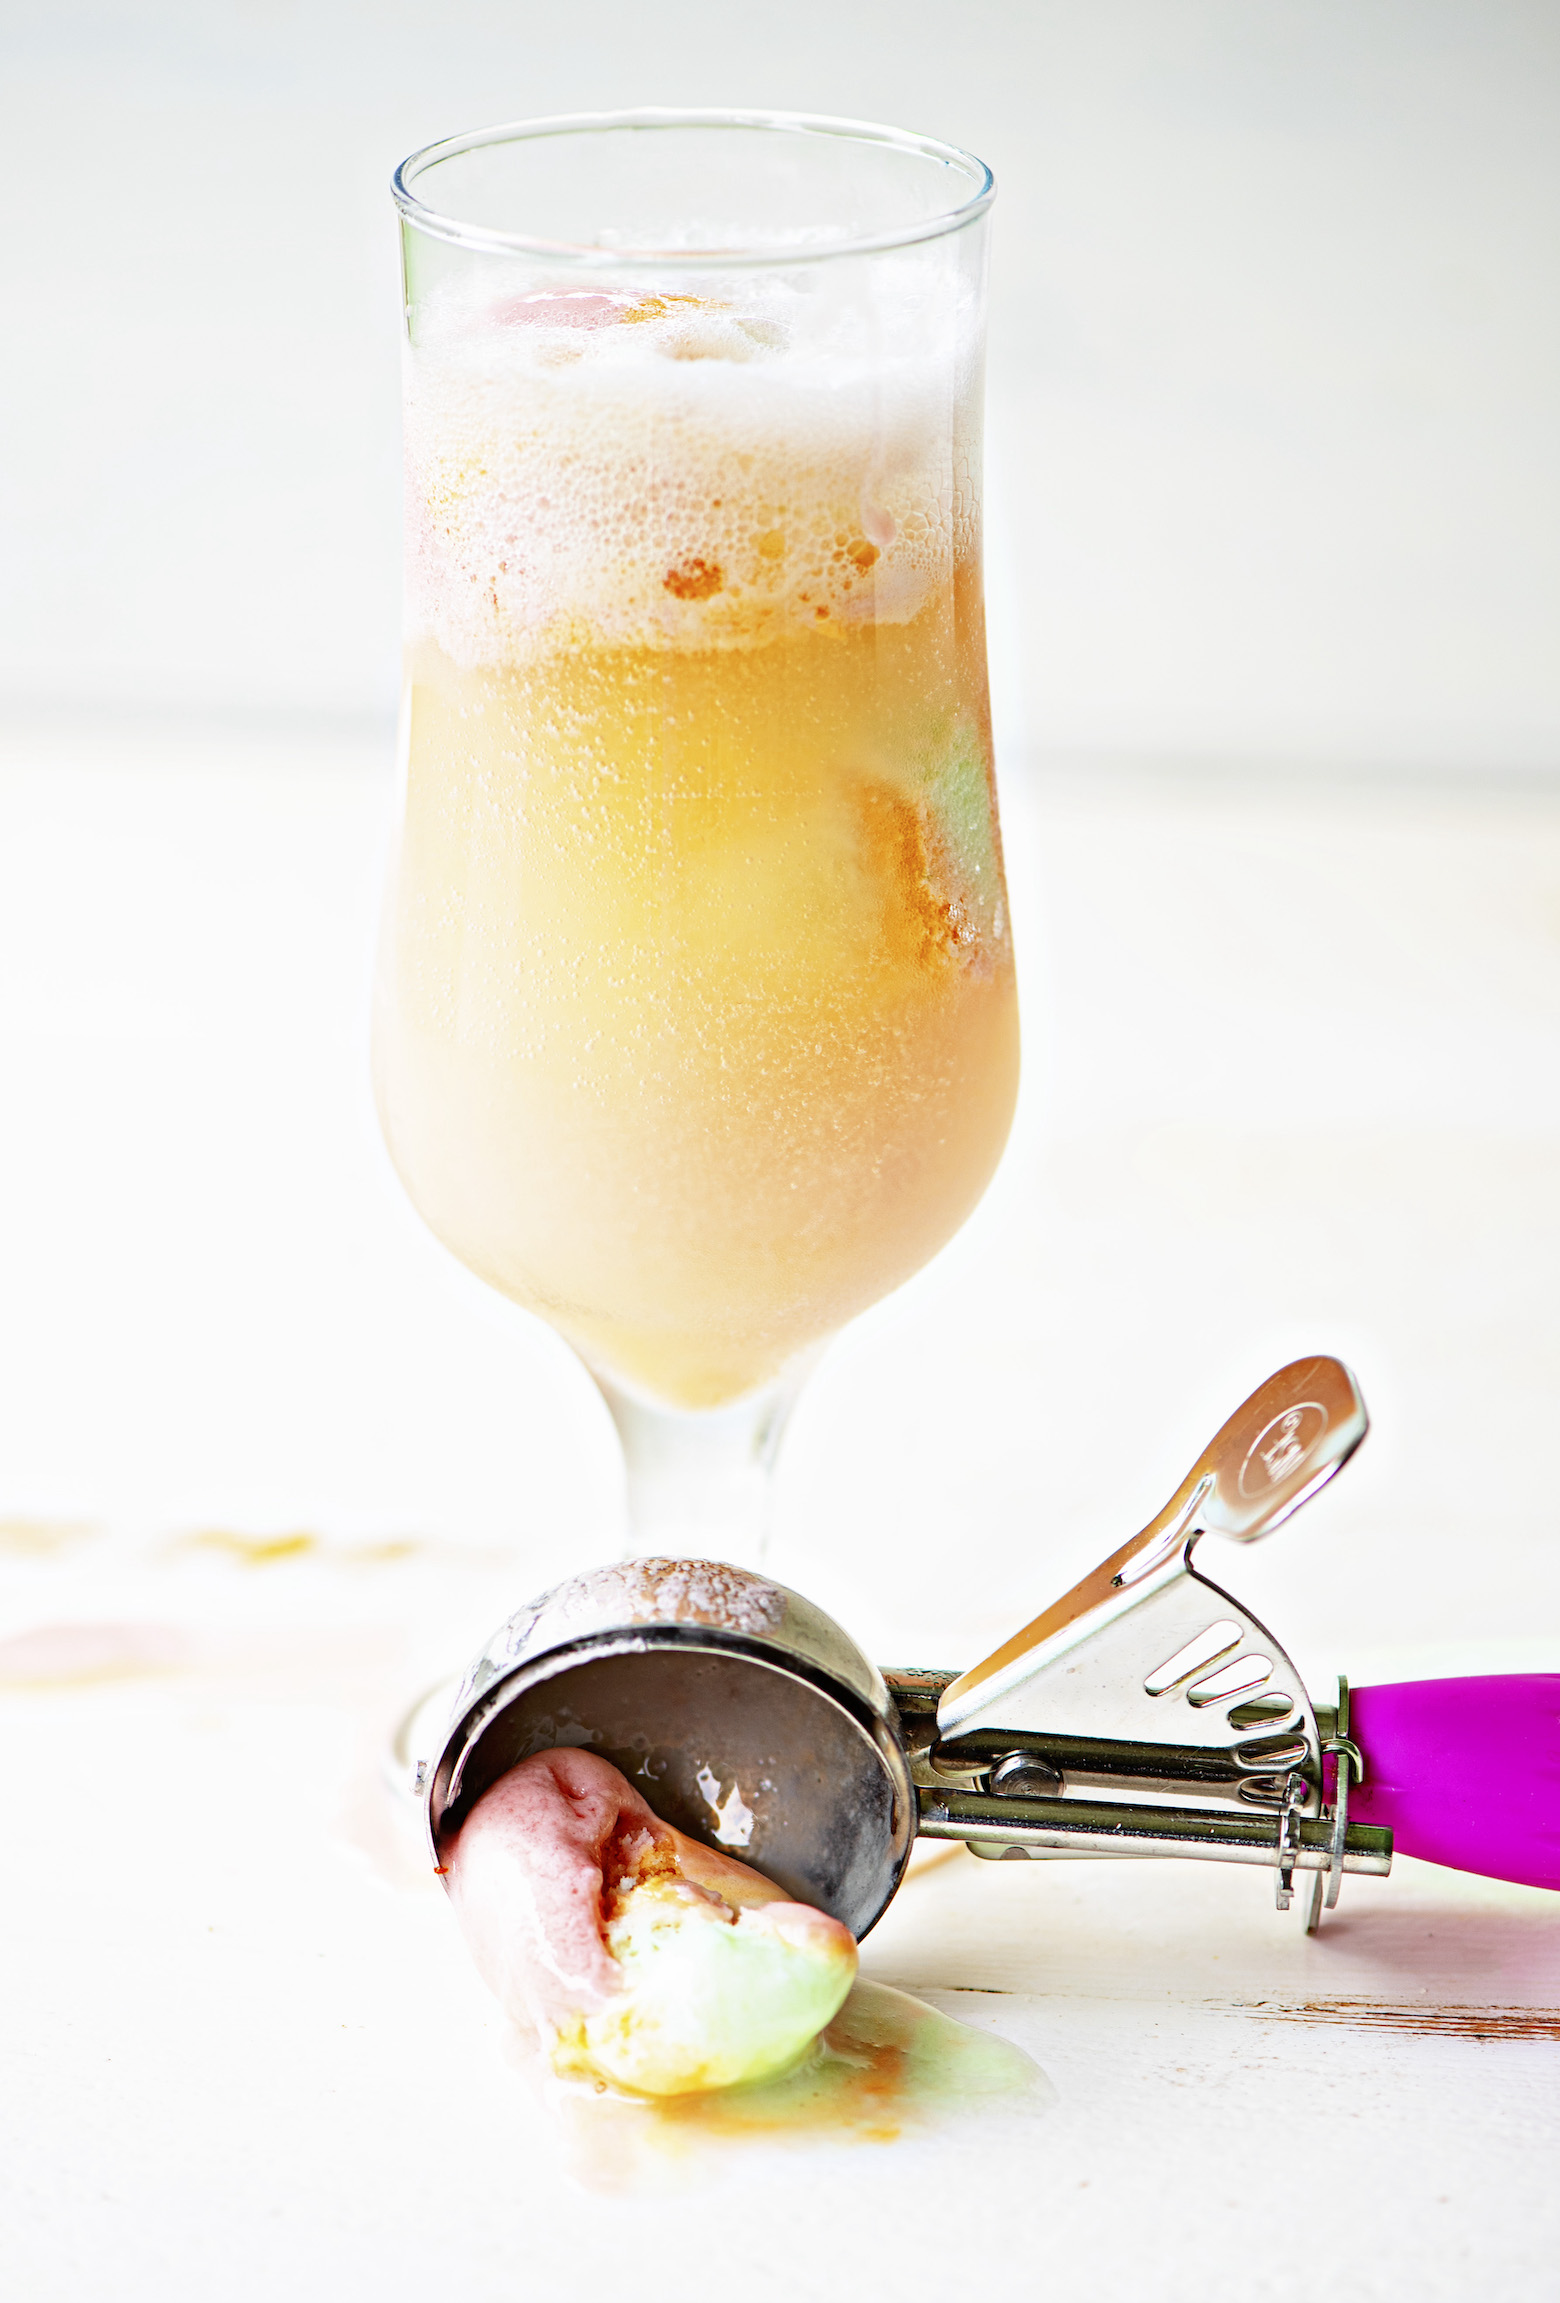 Single glass with bubbles from the selzer in the cocktail with scoops of rainbow sherbet in it. A ice cream scoop with some rainbow sherbet still in it sits below the glass. 